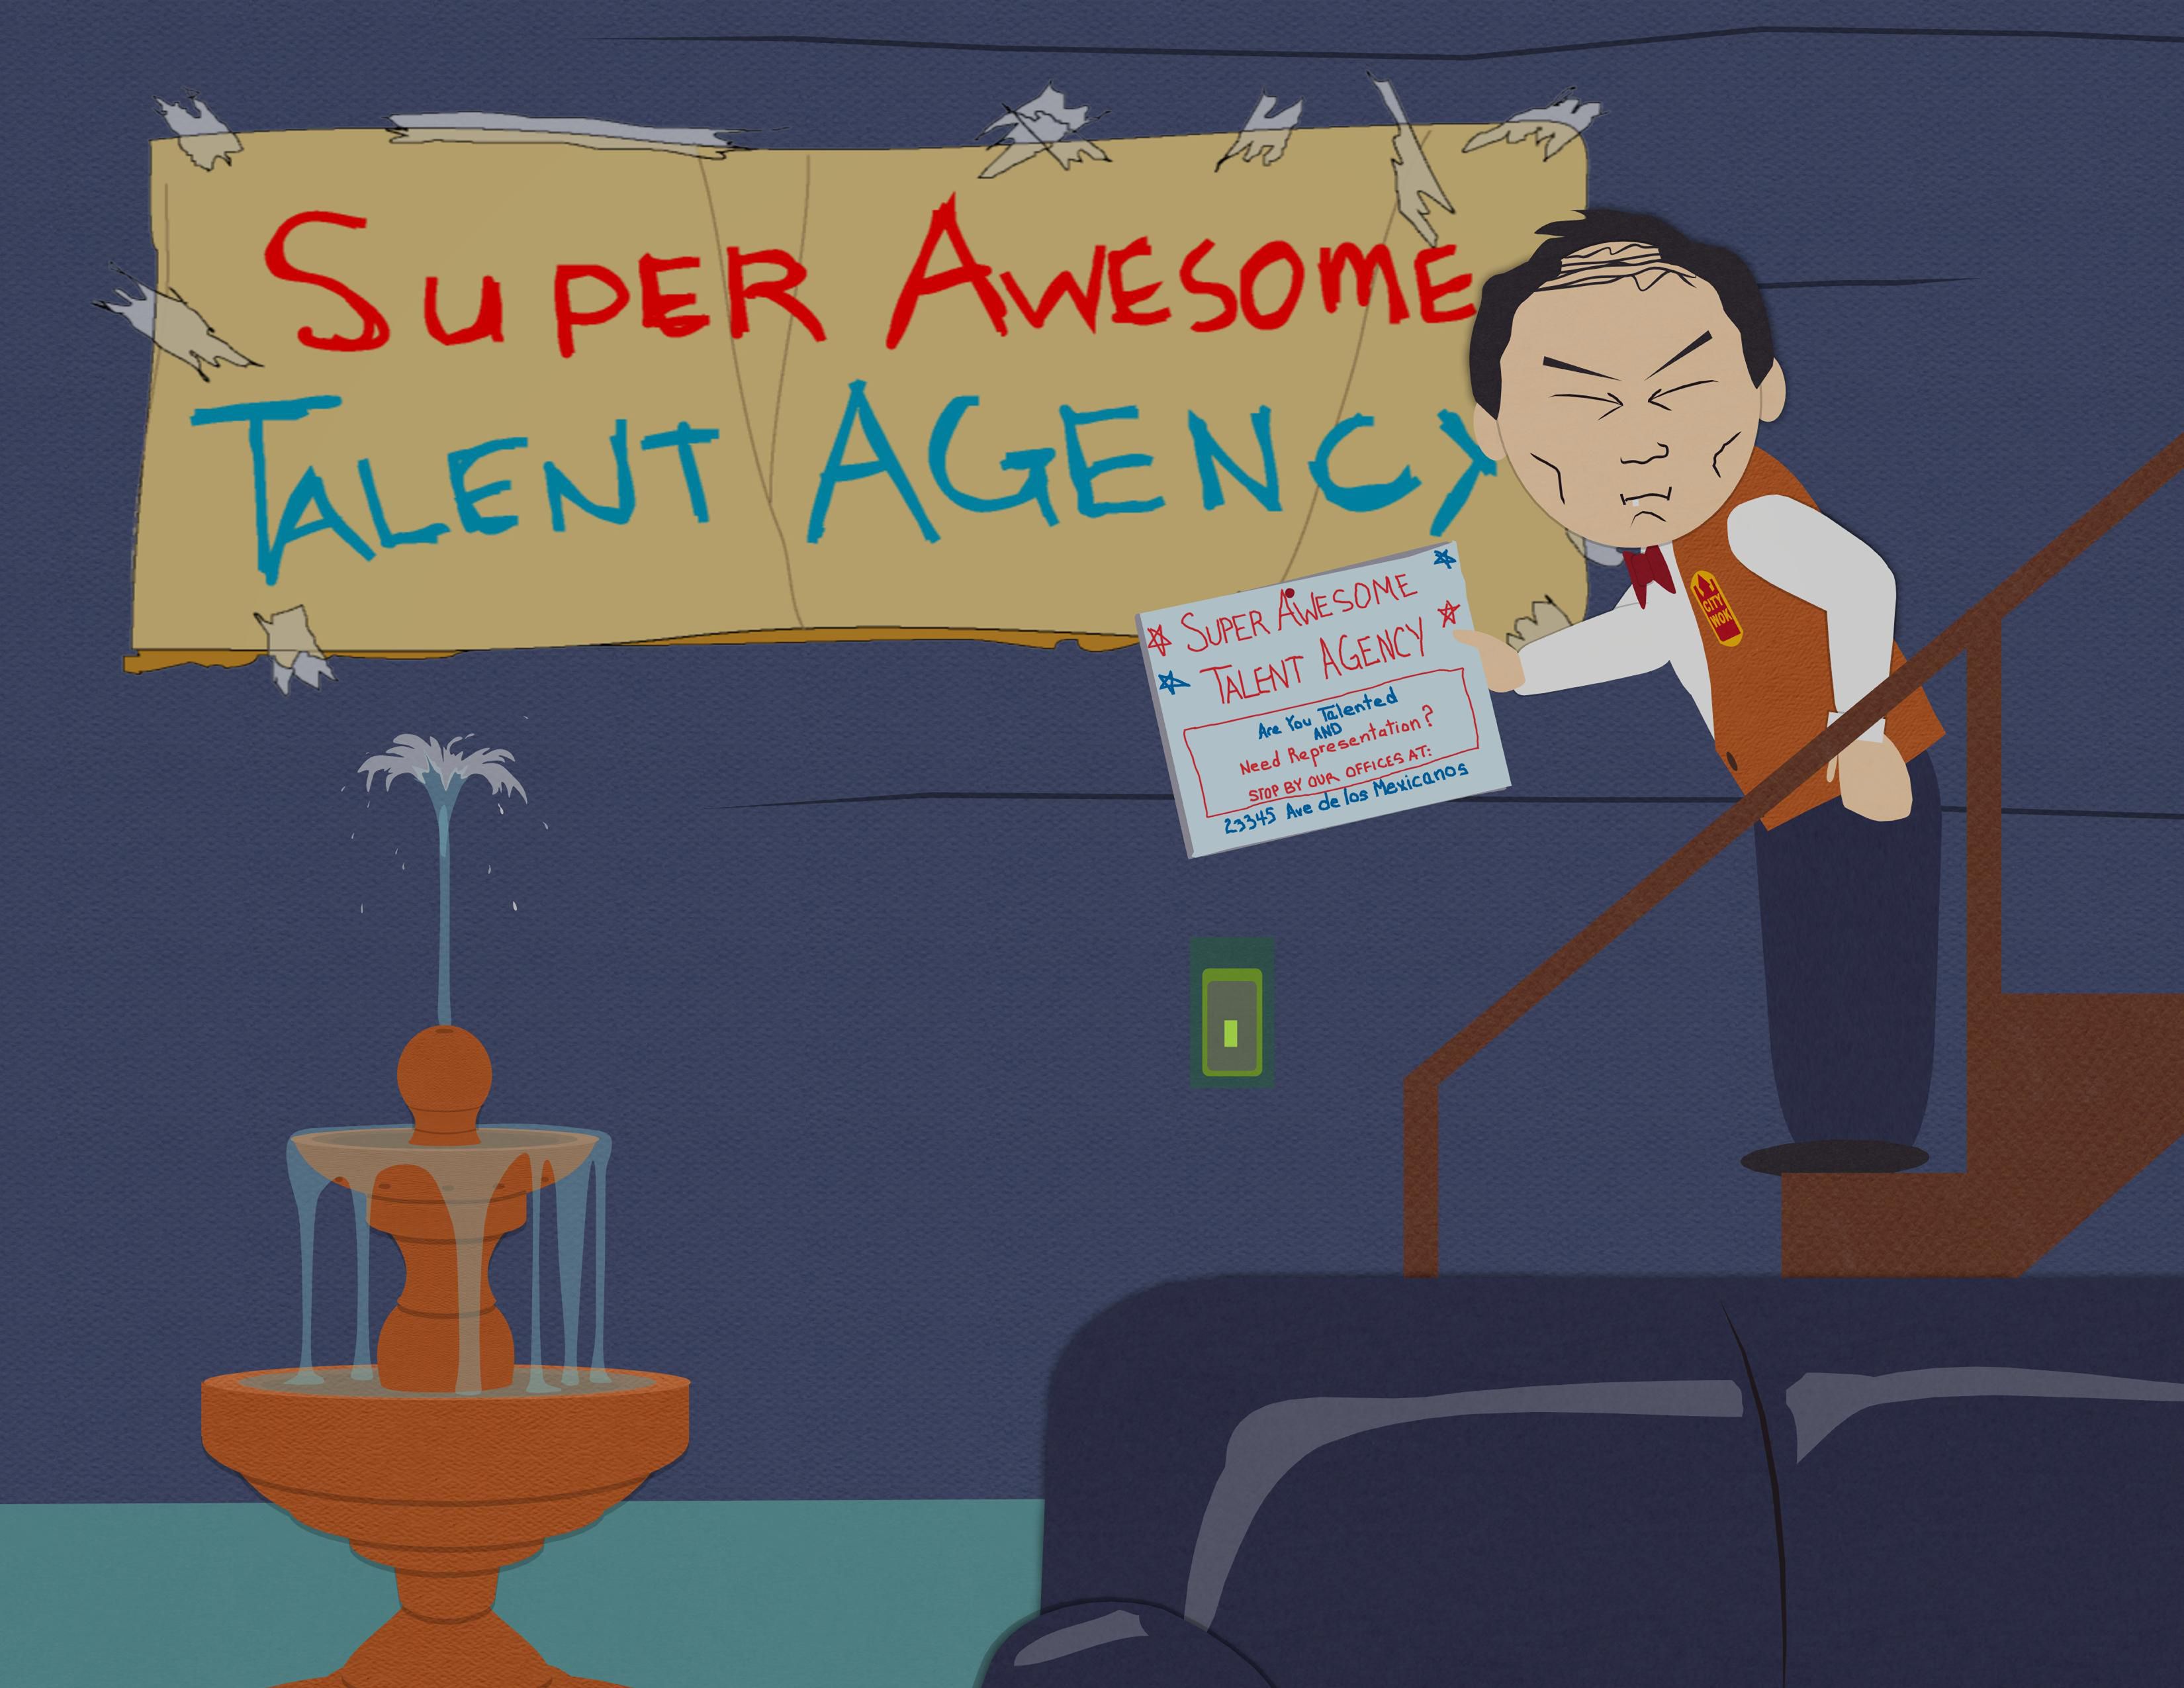 South Park Super Awesome Talent Agency represents Wing